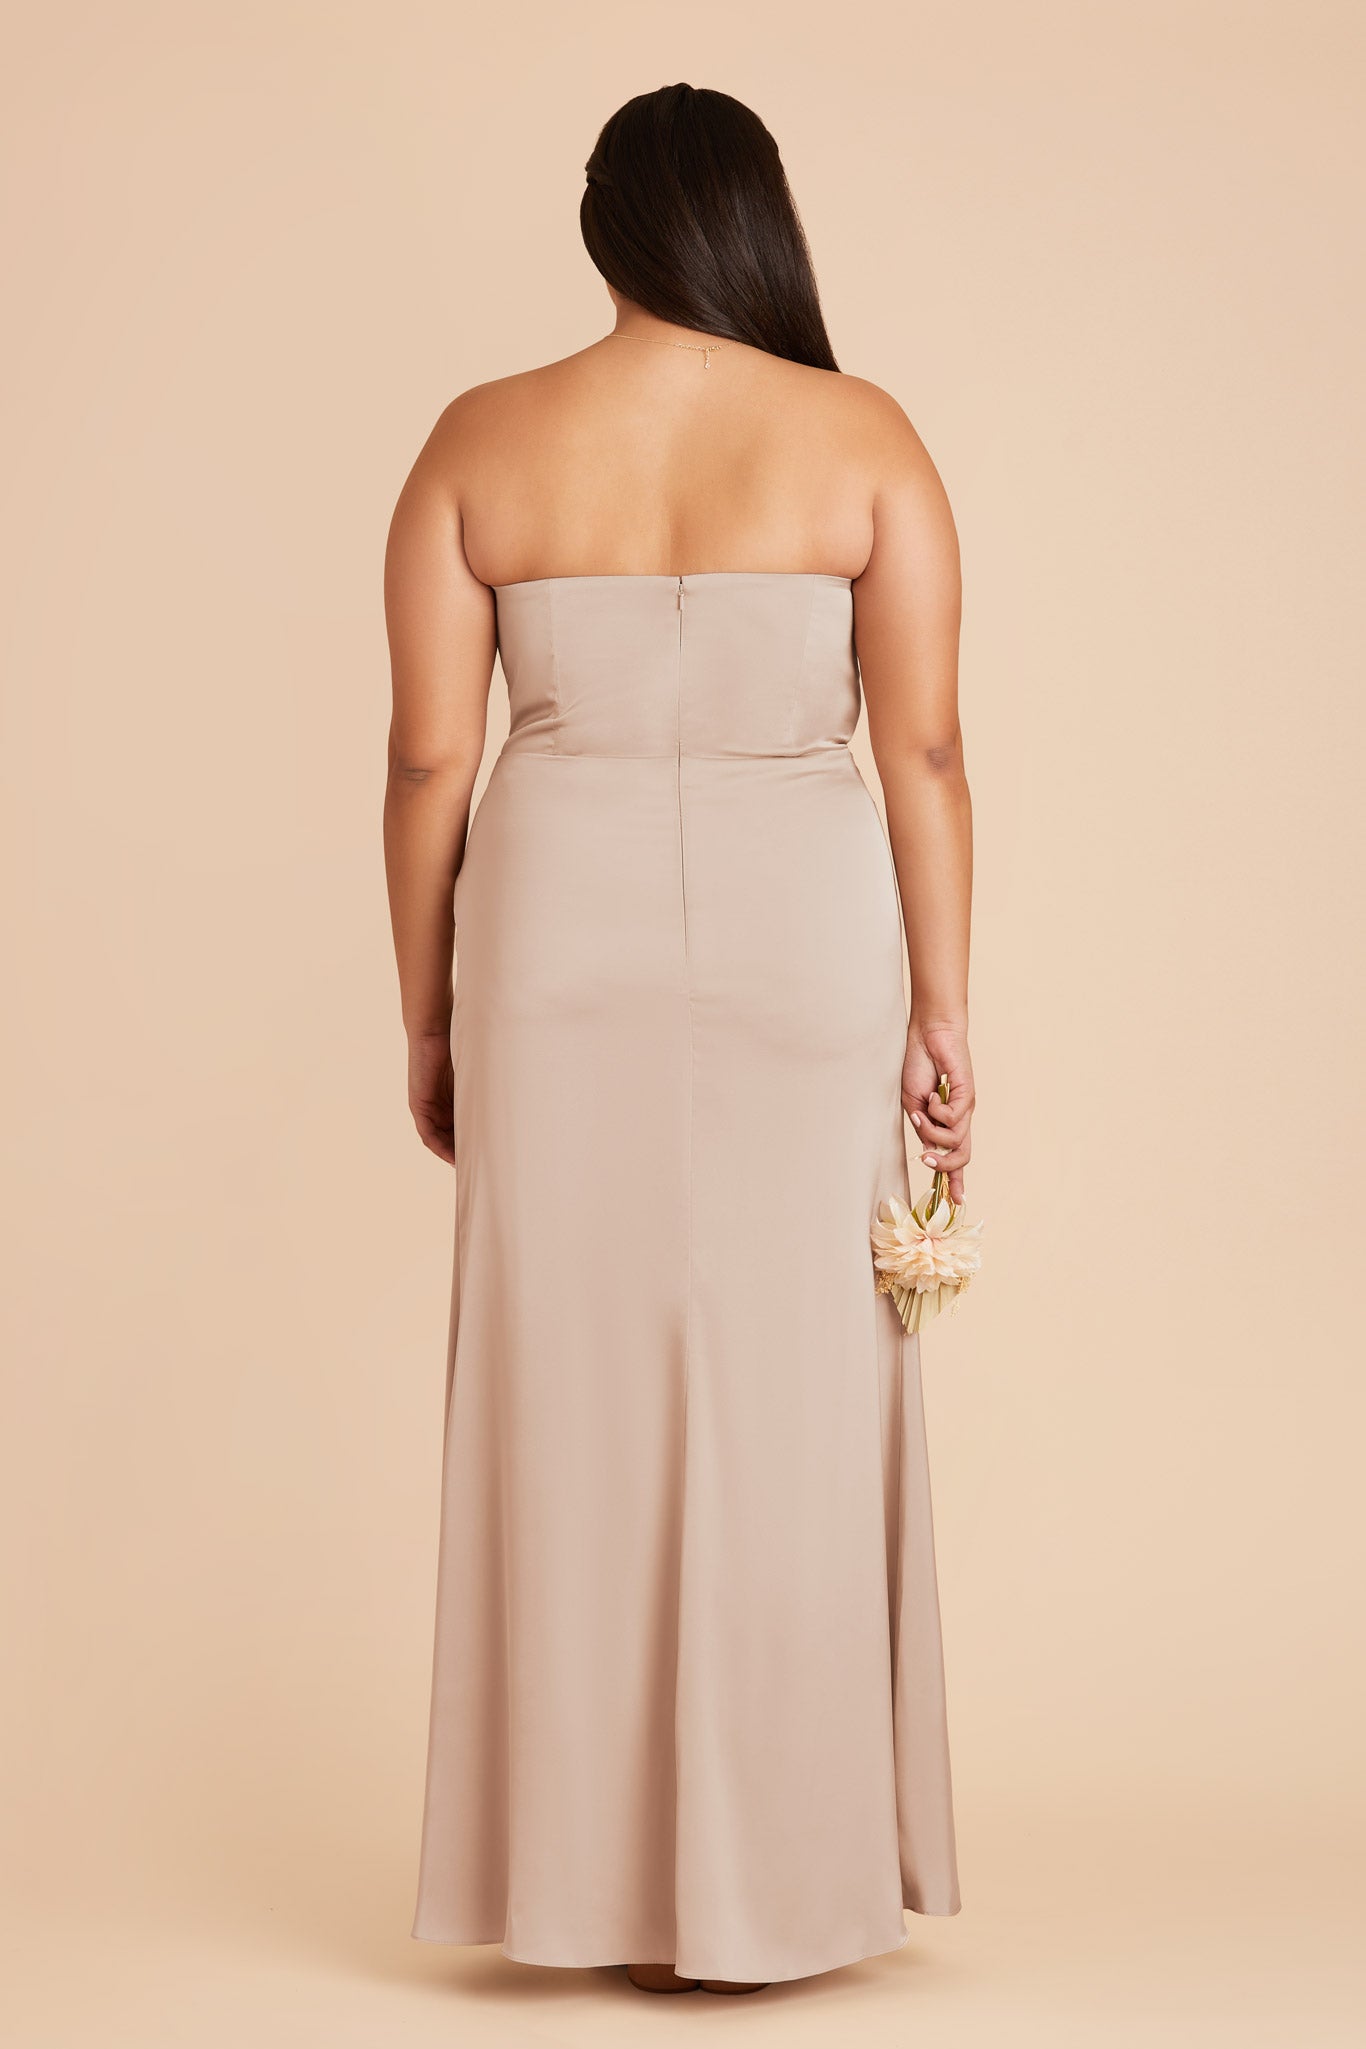 Taupe Anne Matte Satin Dress by Birdy Grey